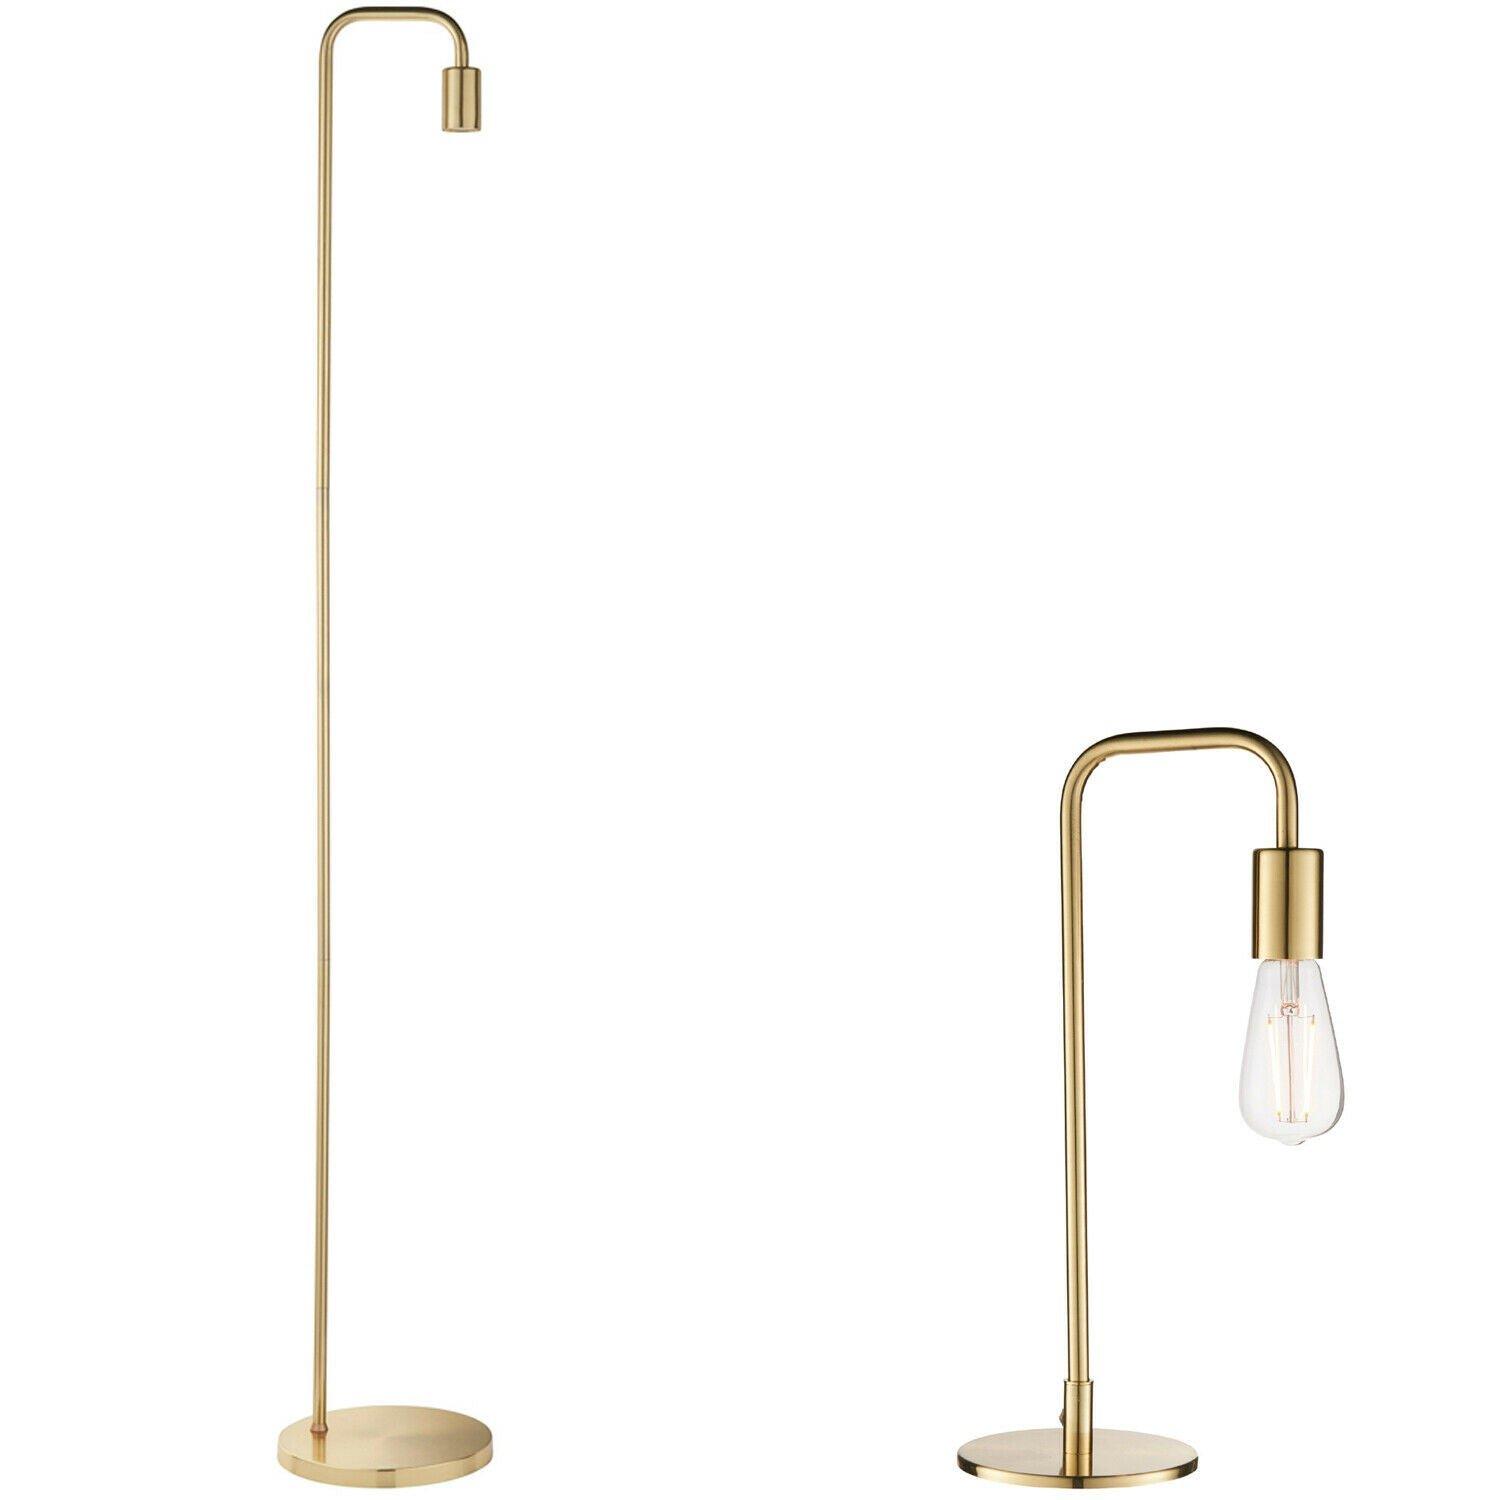 Standing Floor & Table Lamp Set Brushed Brass Industrial Curved Arm Slim Light